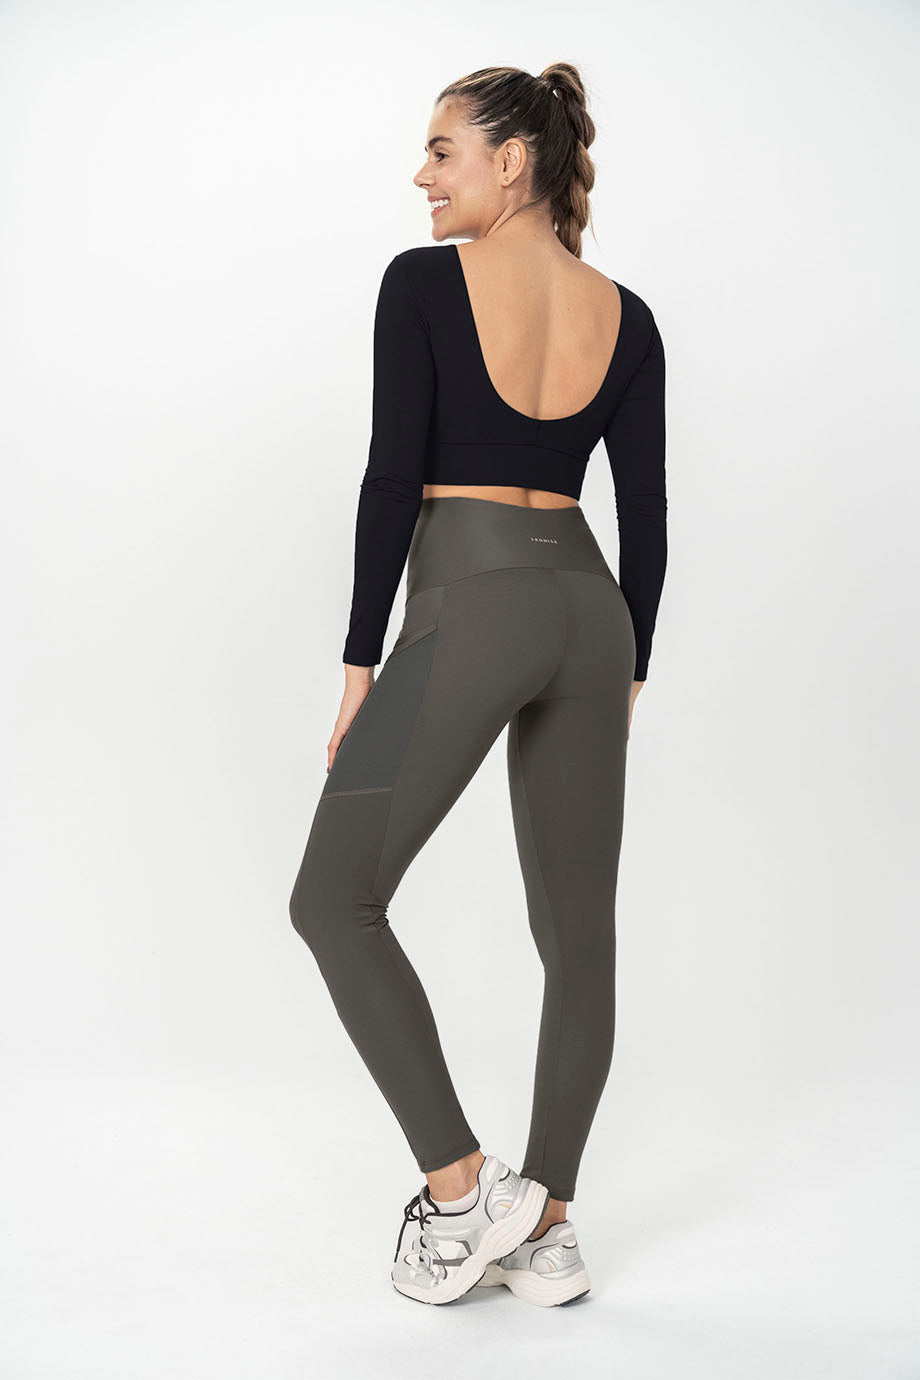 shaper legging with two side pockets